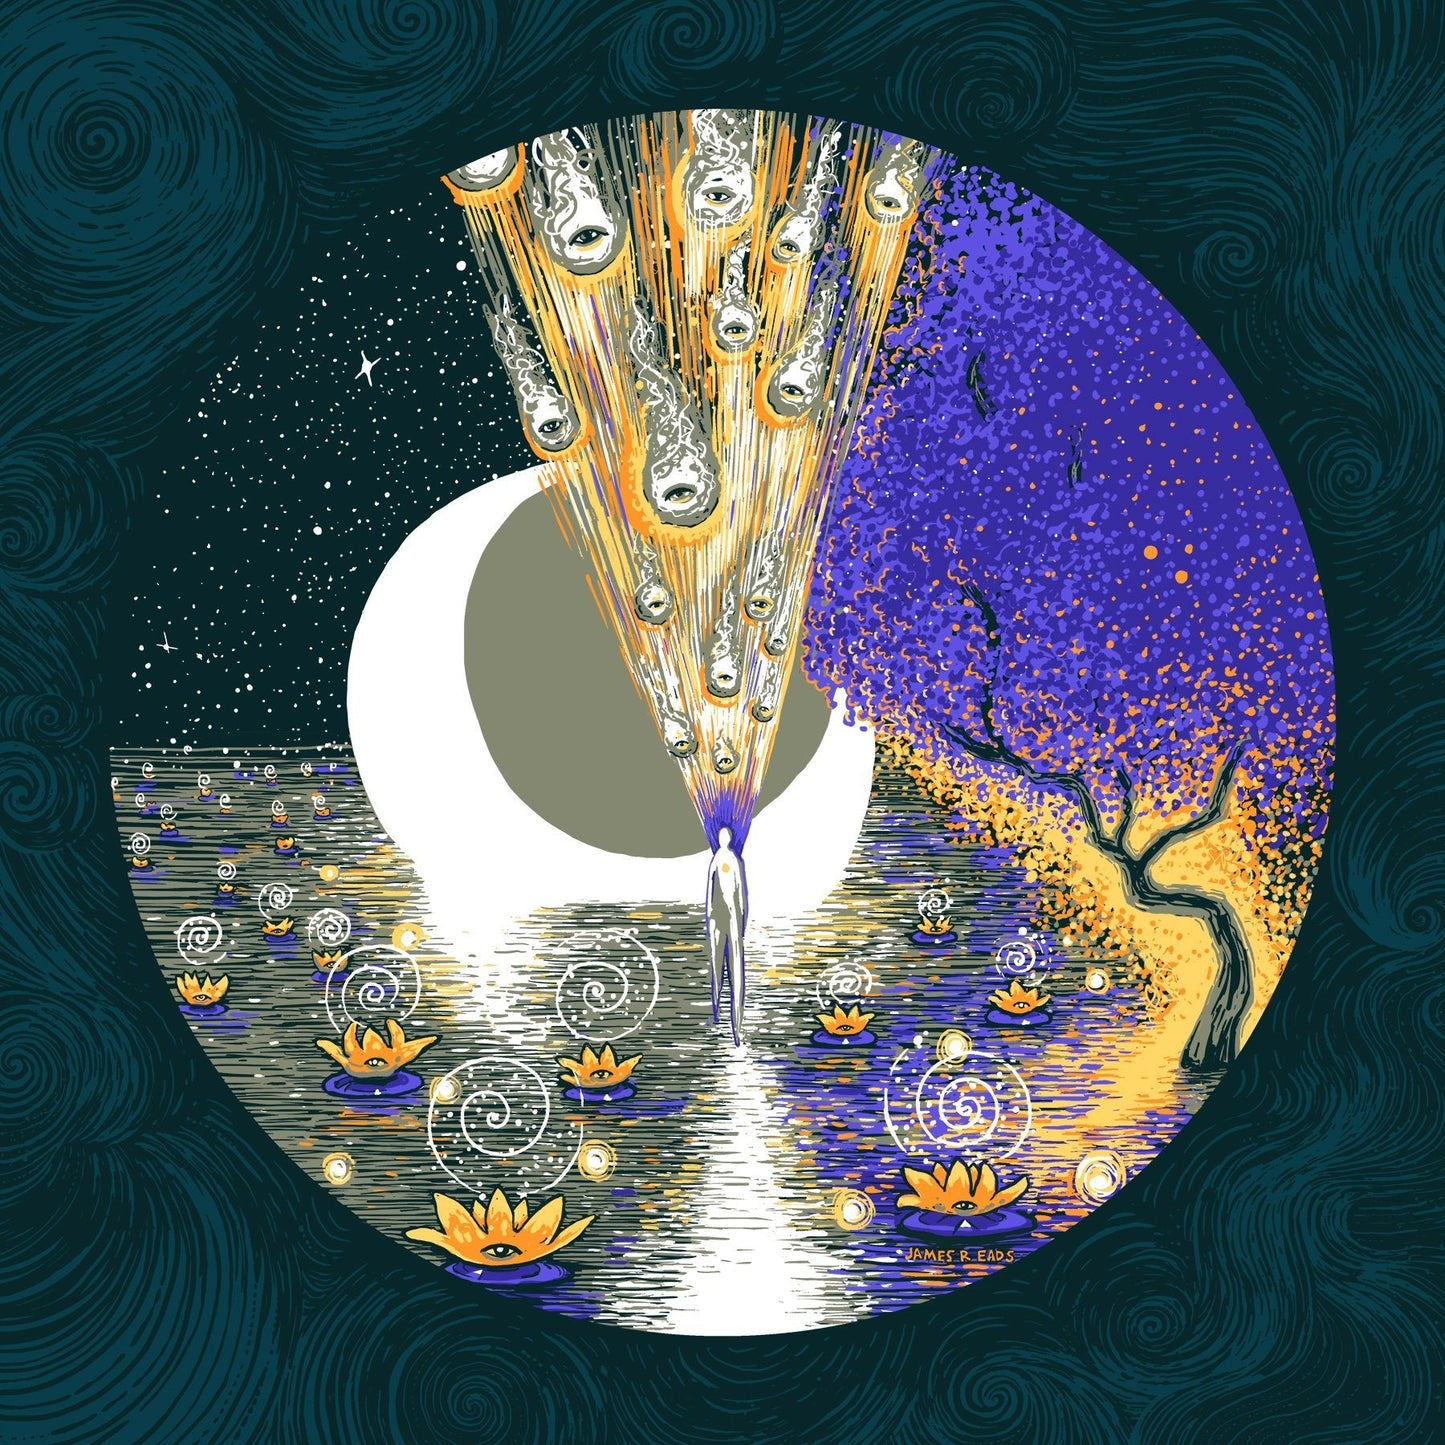 Dream Tracks EP (Available at Posters 4 People) James R. Eads